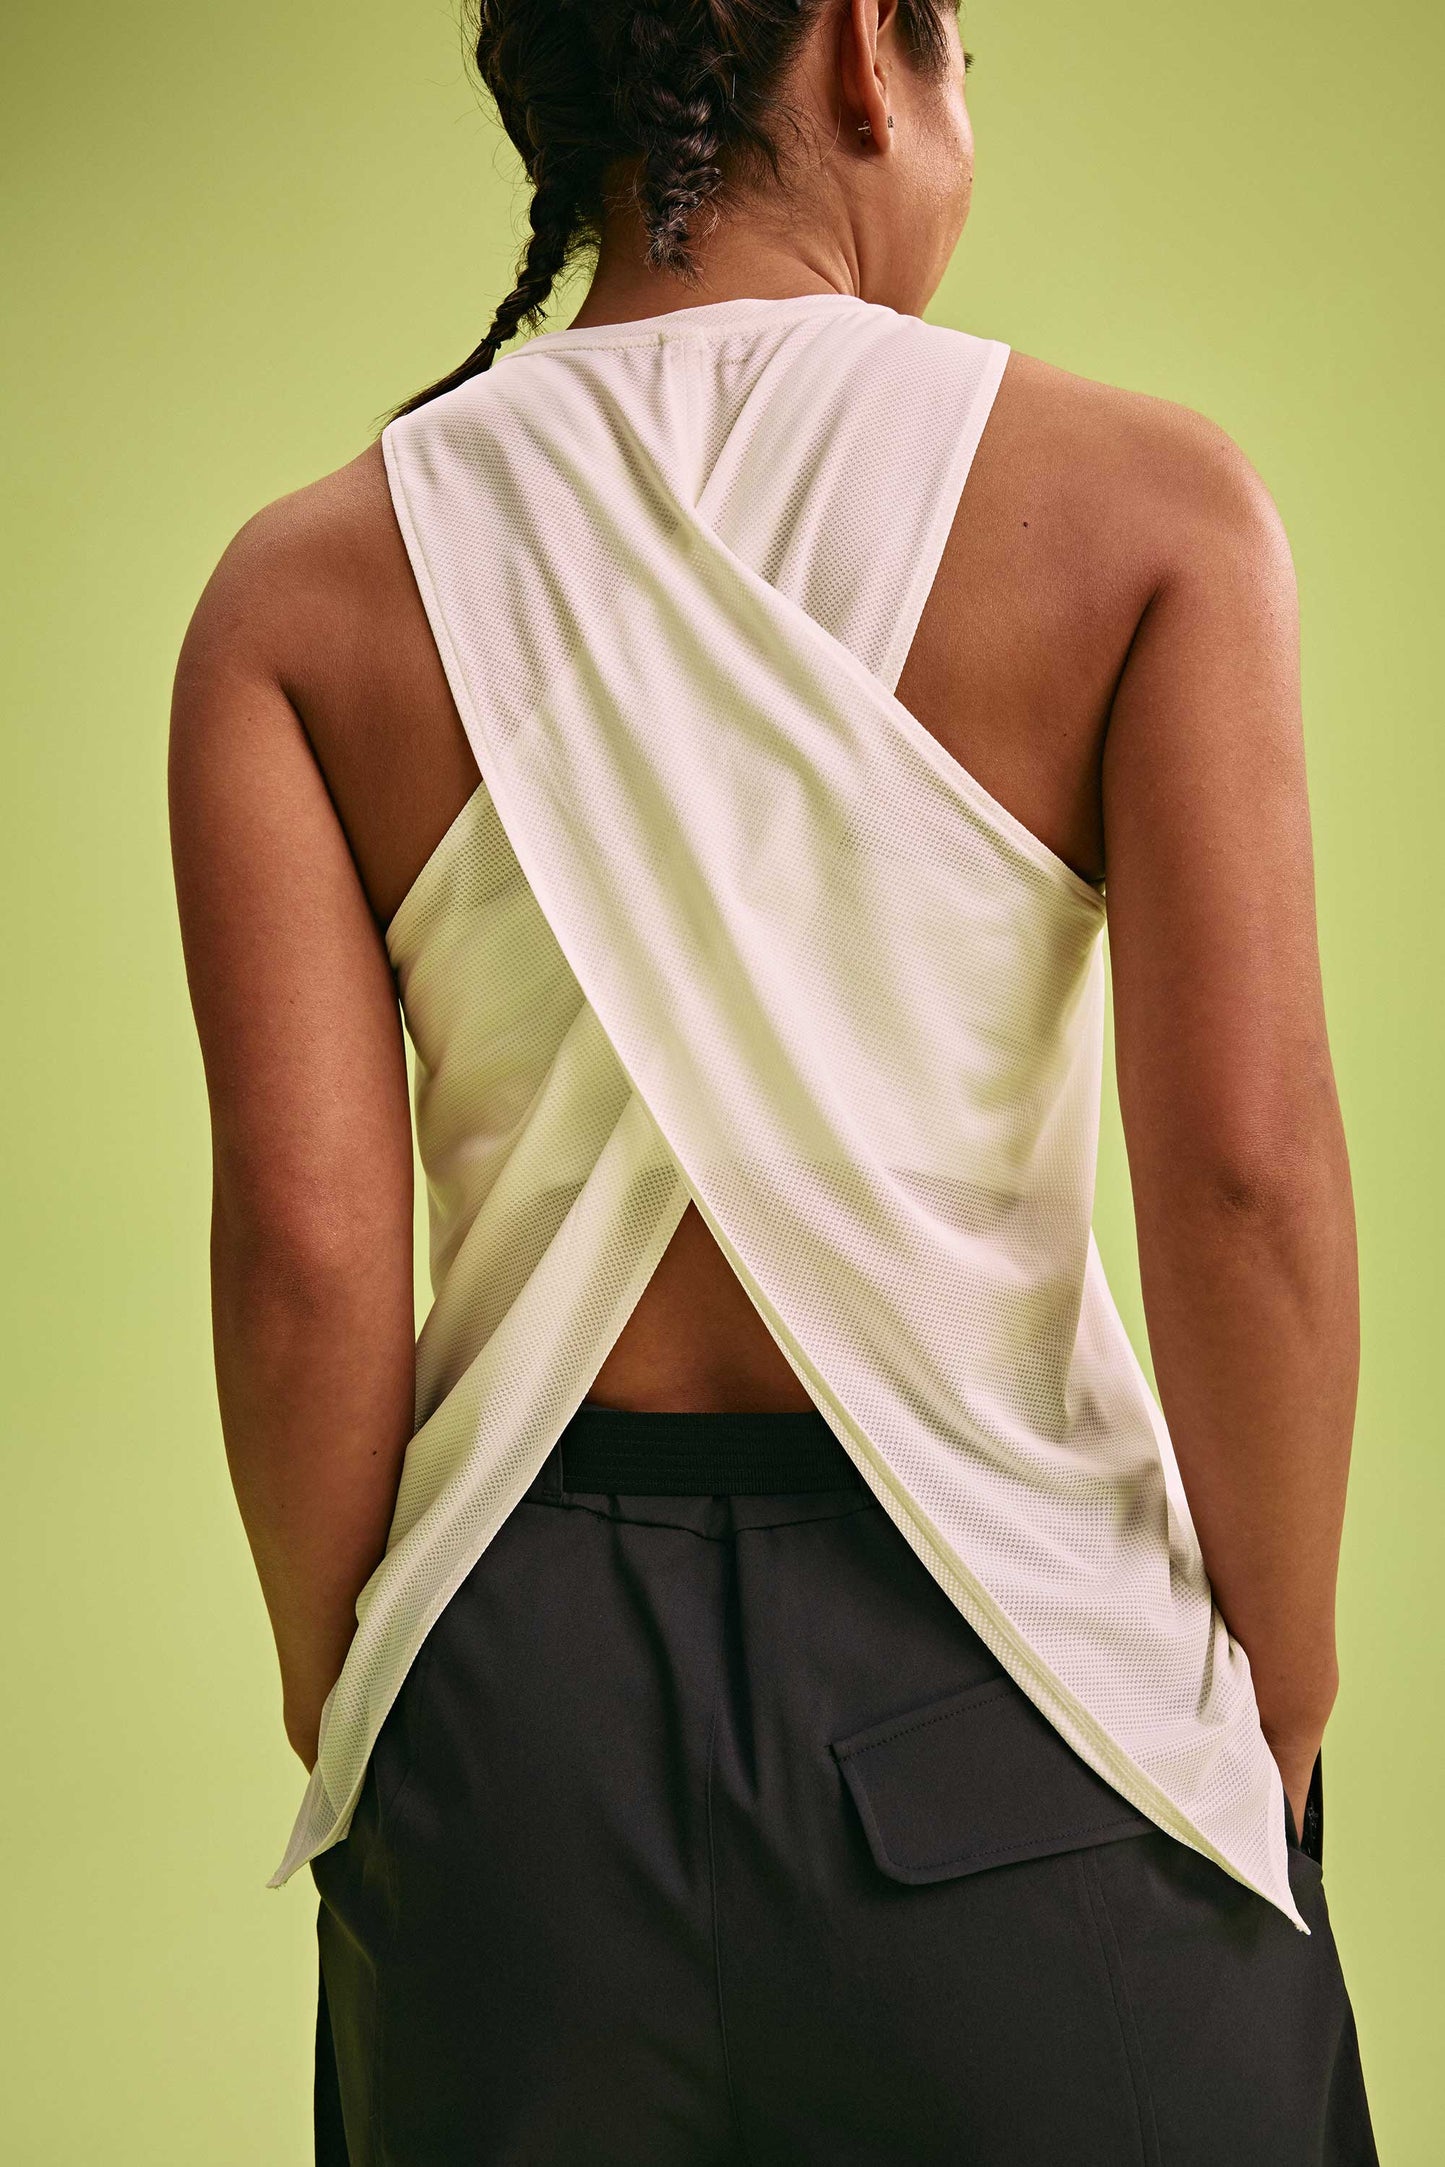 back of a woman wearing cross back tank and black pants